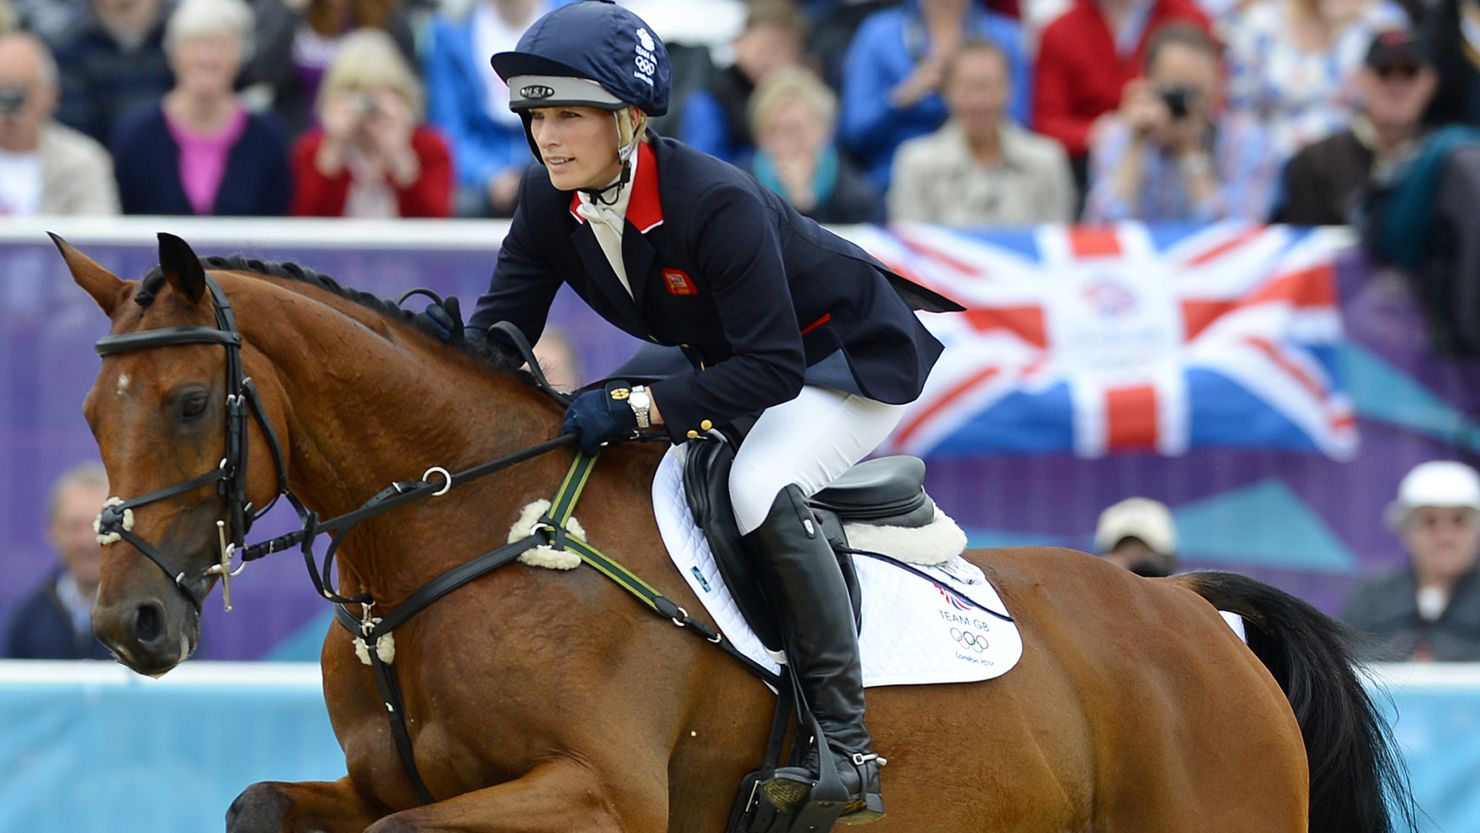 Queen Elizabeth II's granddaughter Zara Tindall won silver at the London 2012 Olympics. 